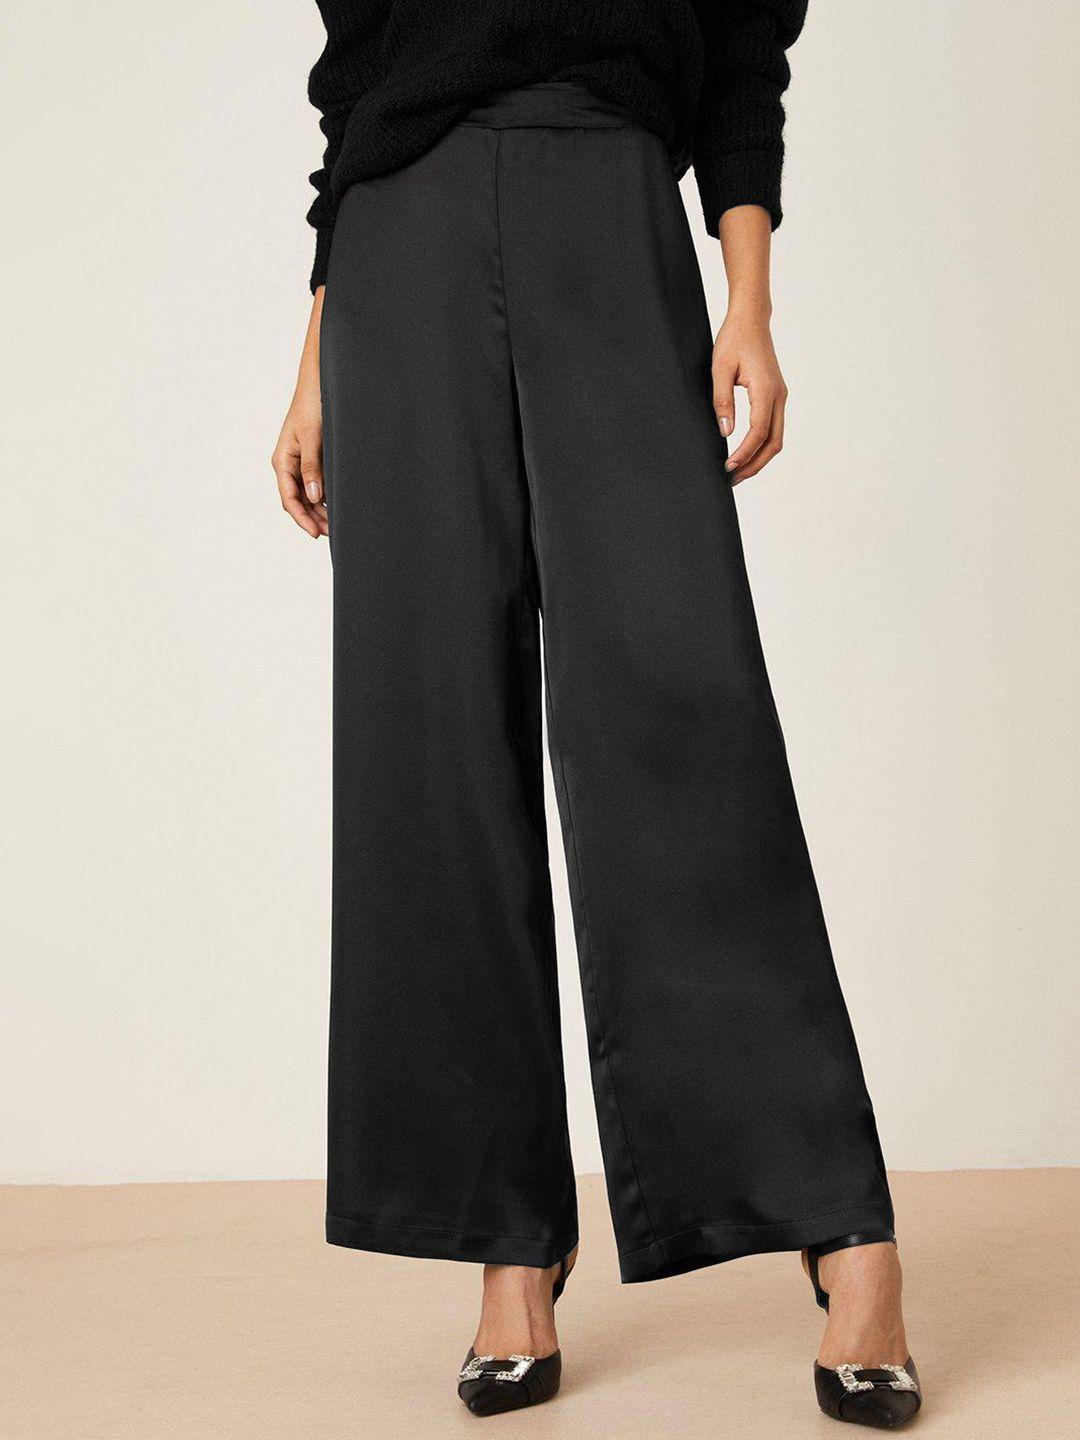 dorothy perkins women satin flared trousers